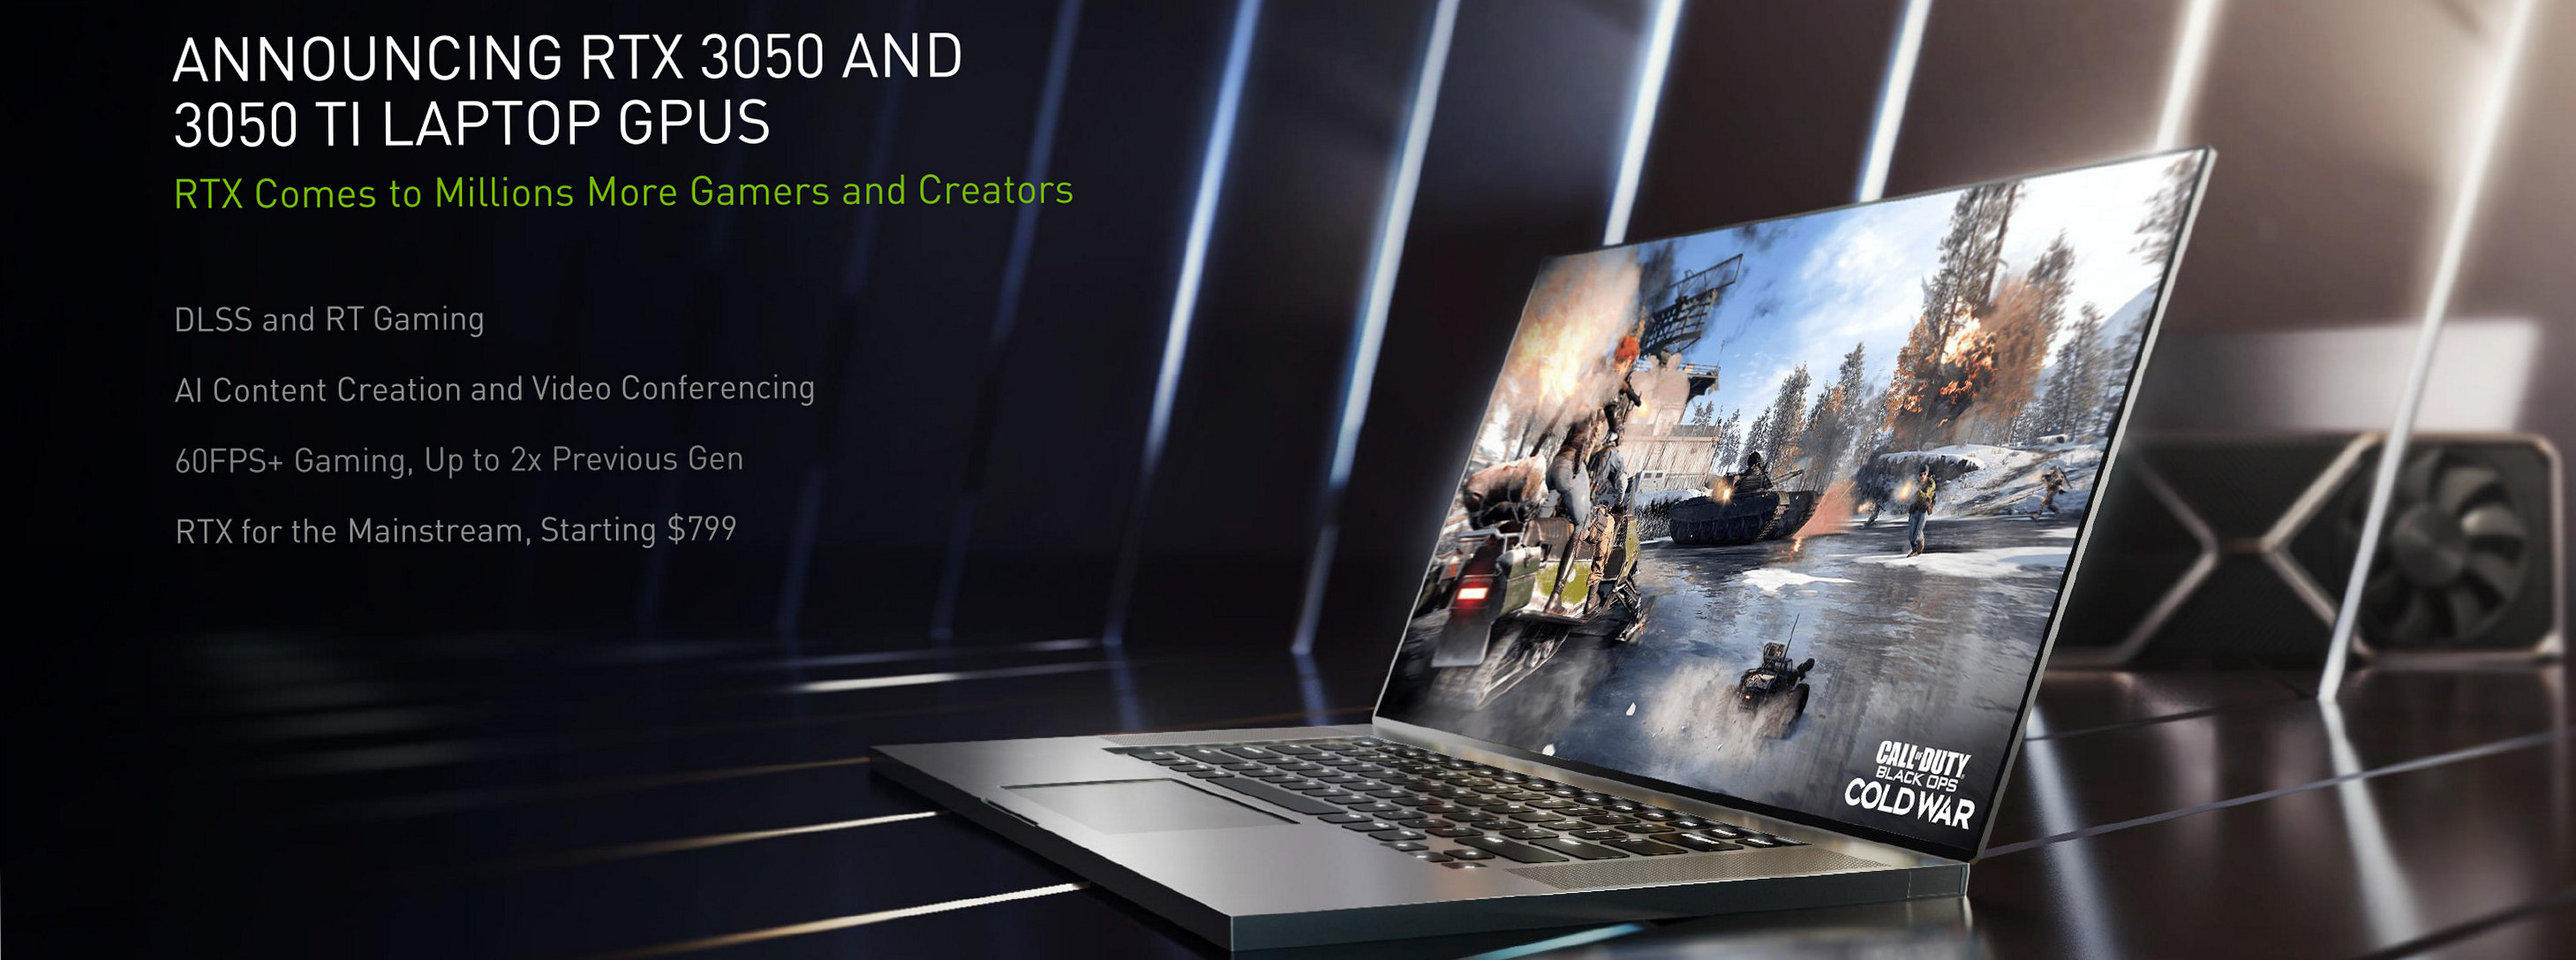 NVIDIA launches GeForce RTX 3050 Ti and RTX 3050 Laptop GPUs 